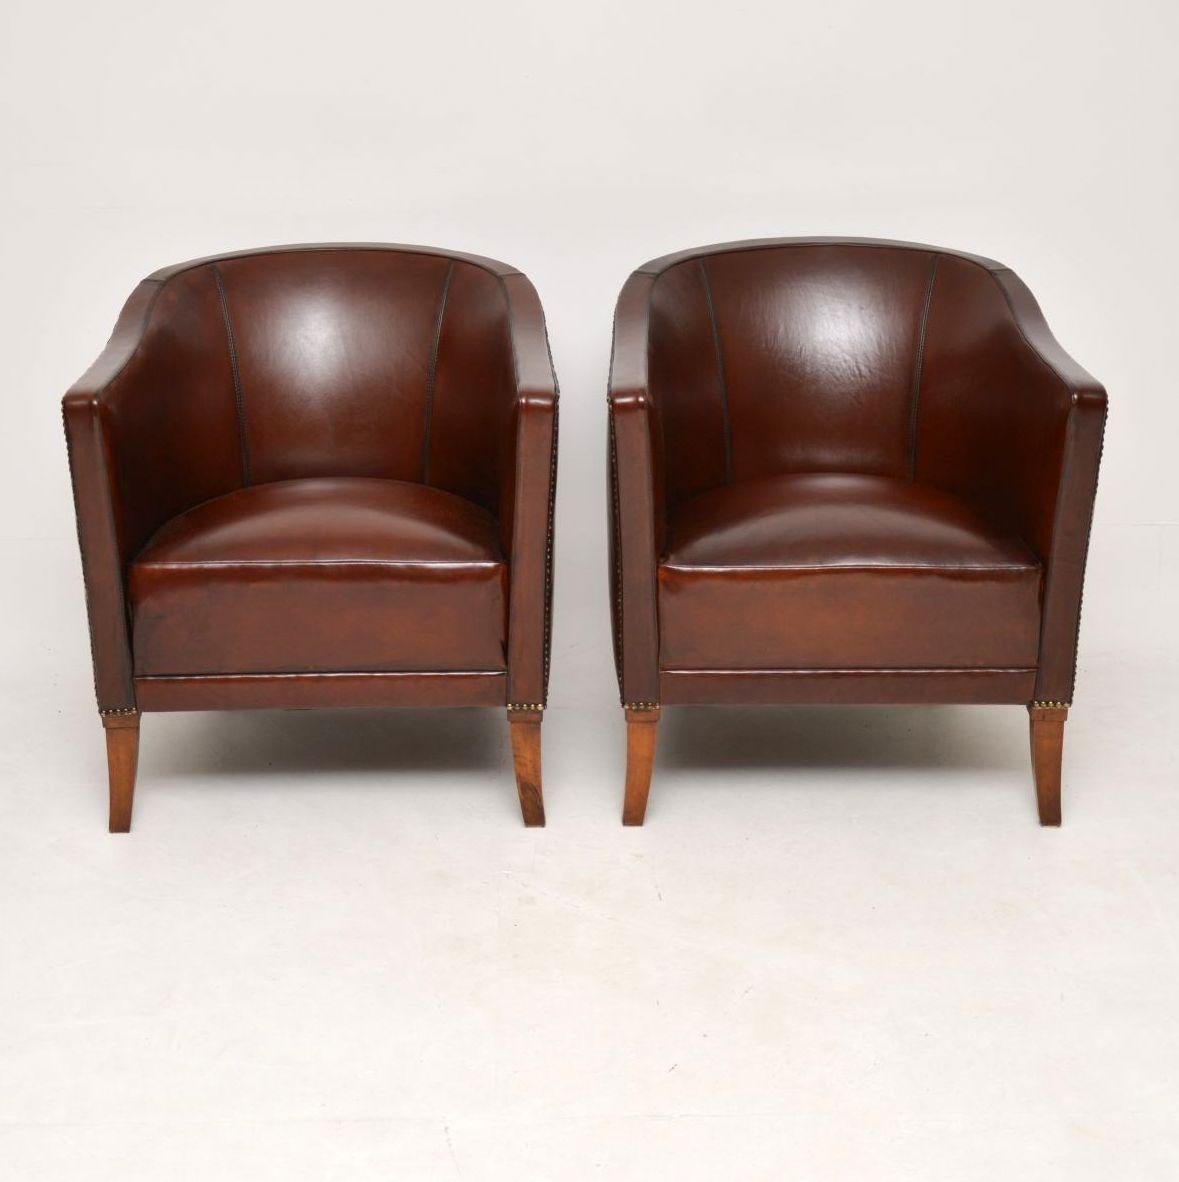 Very stylish pair of antique Swedish curved back leather armchairs in good condition and dating to circa 1890-1910 period. These chairs are a really nice model and very comfortable too. The leather has a lovely rich colour. It’s hand tacked onto the